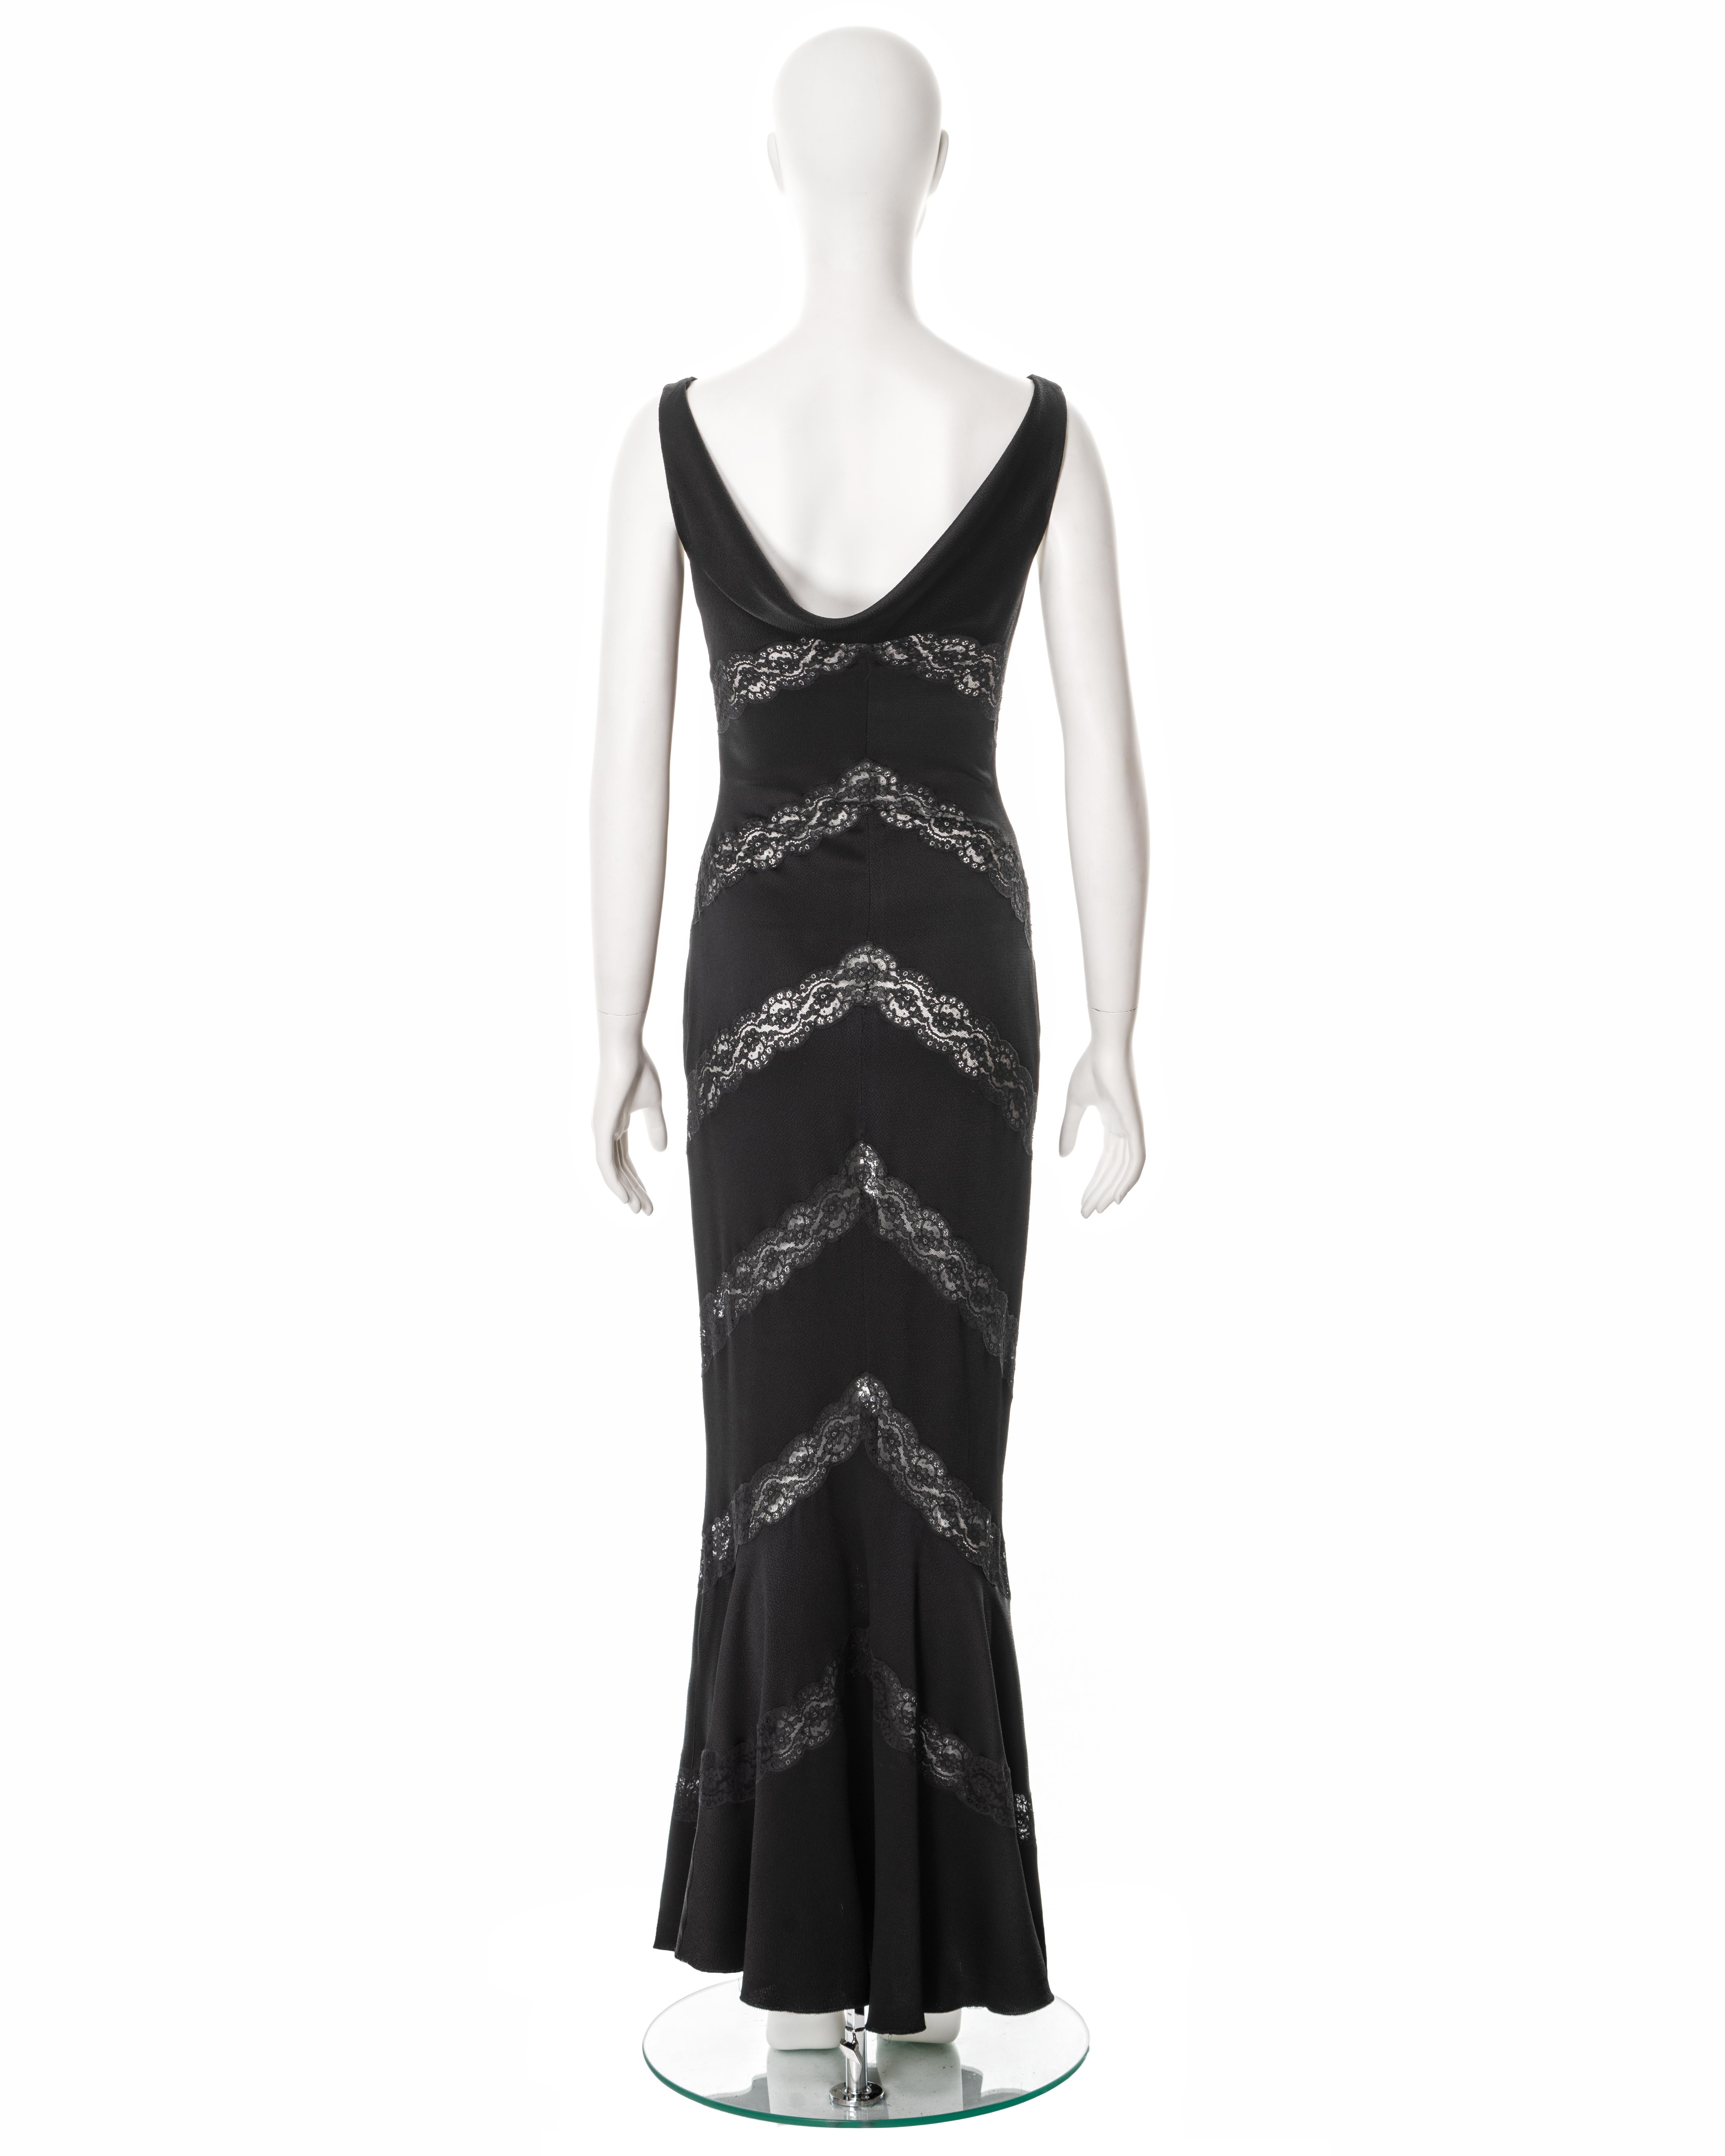 Christian Dior by John Galliano black evening dress with lace inserts, ss 1999 For Sale 4